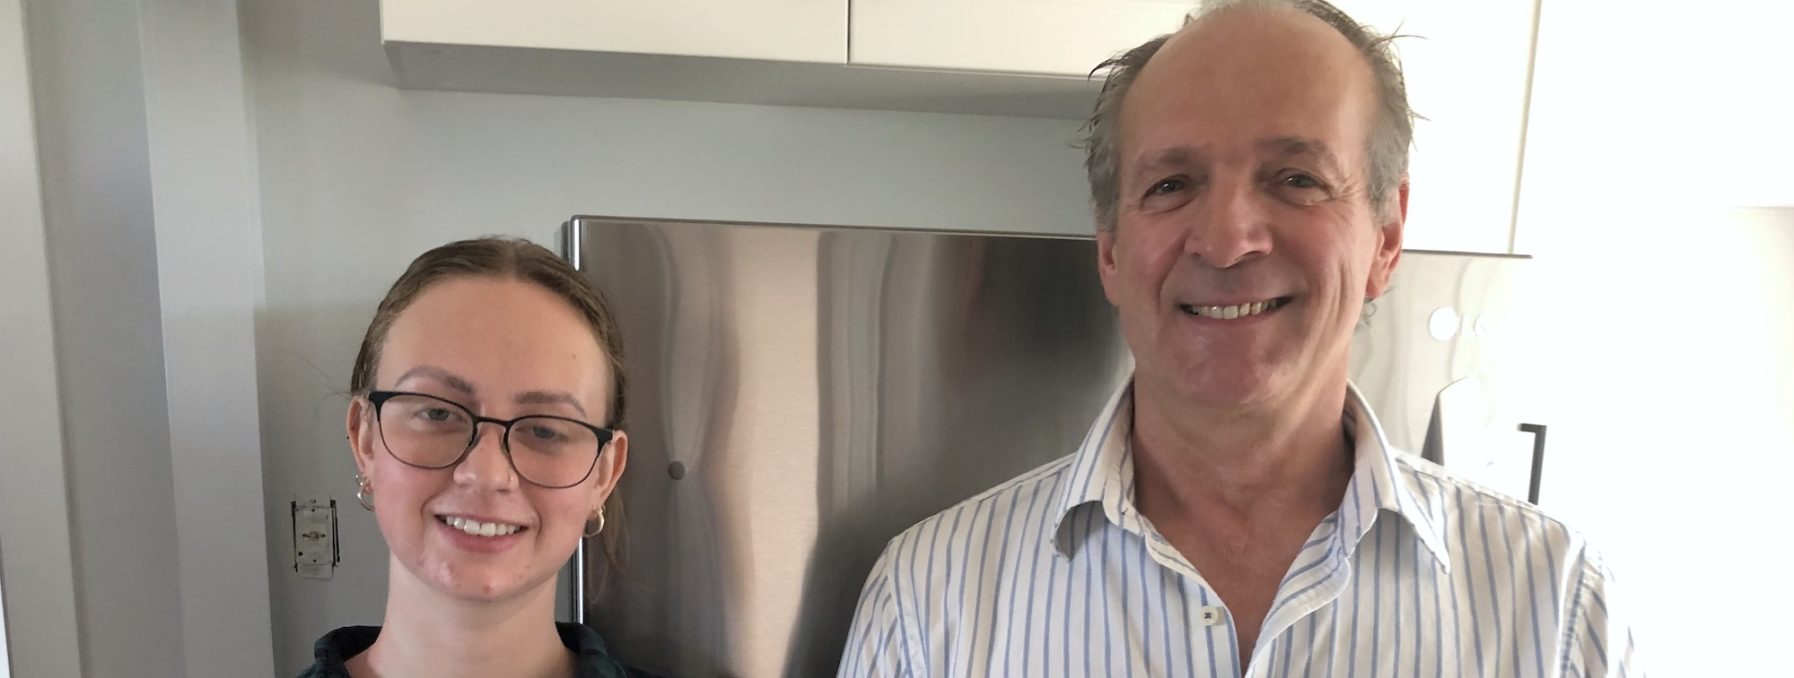 Michelle and Ted Swanson pose for a picture inside a kitchen